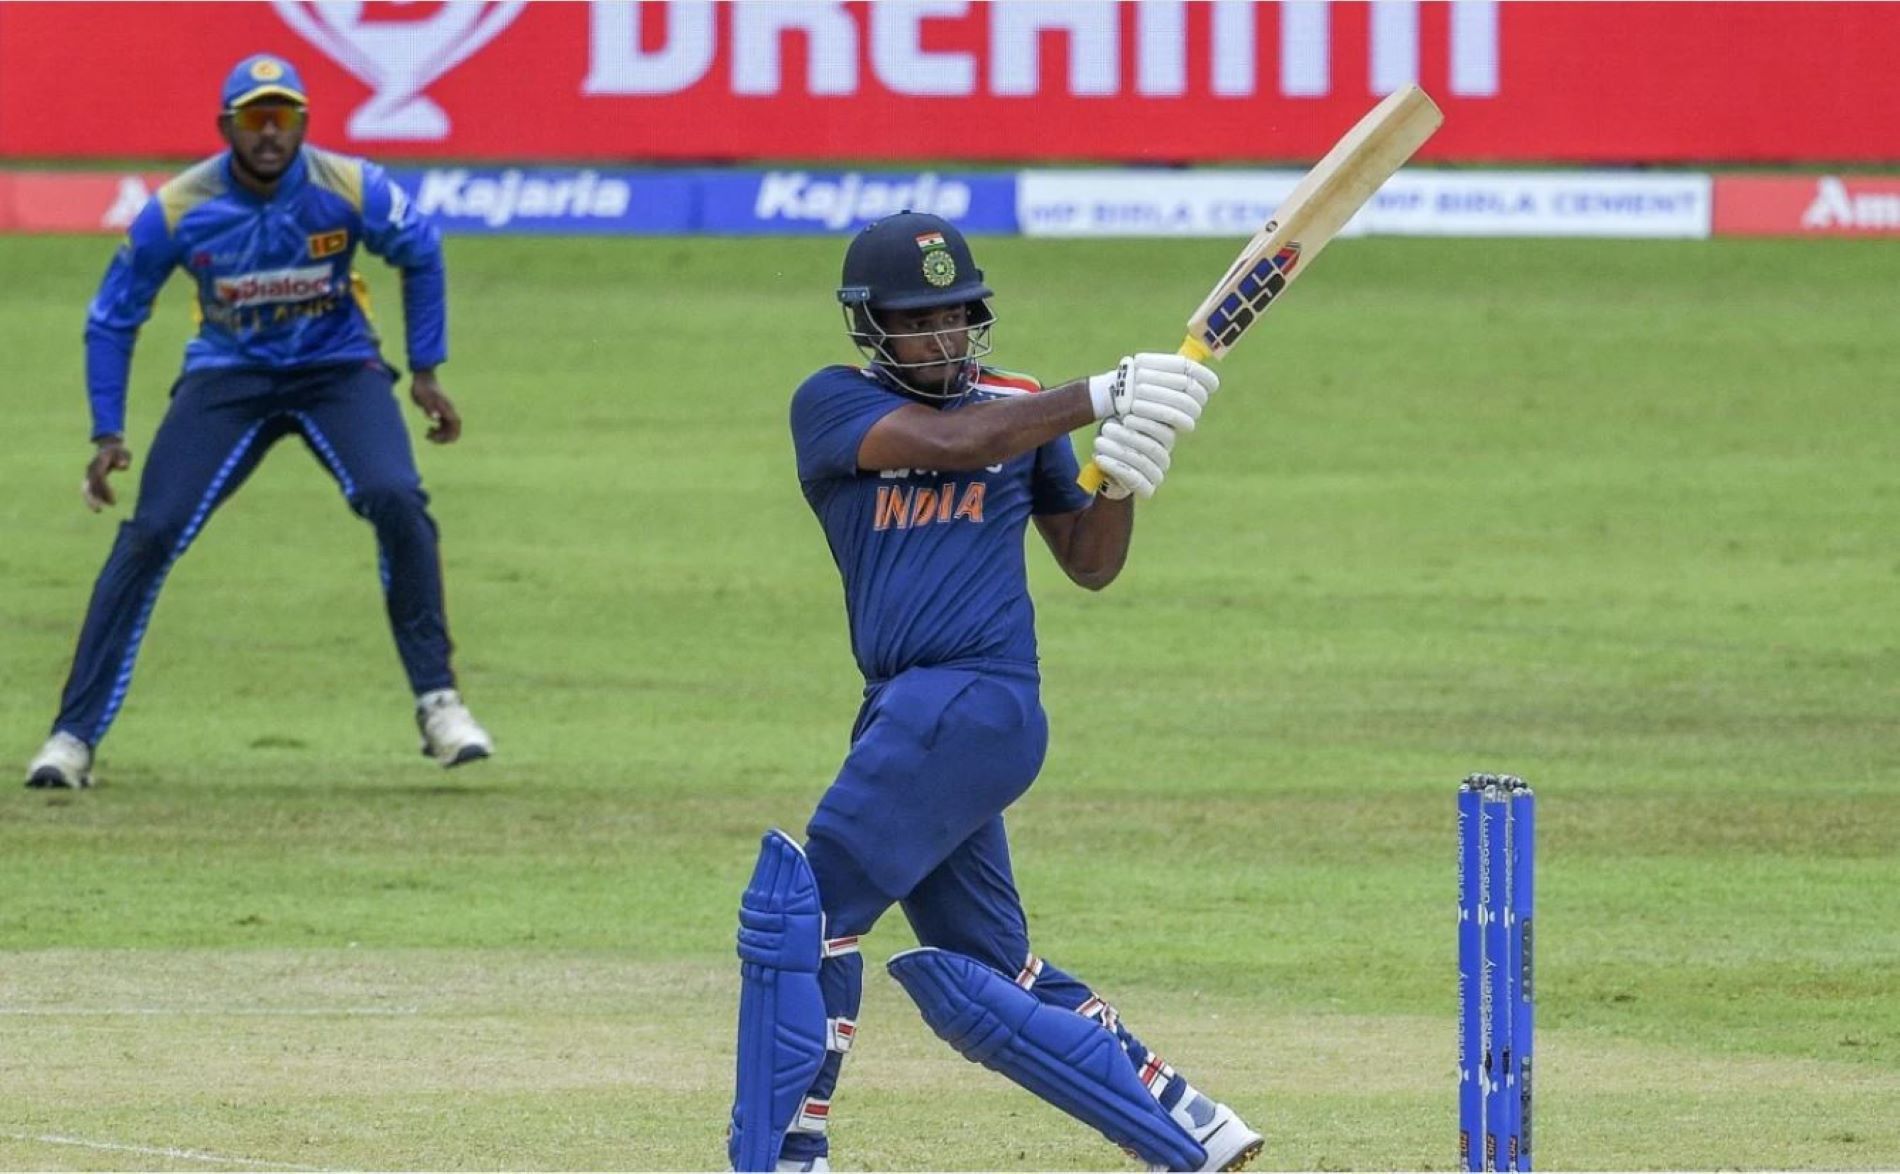 Samson played his maiden ODI innings for India at No.3.